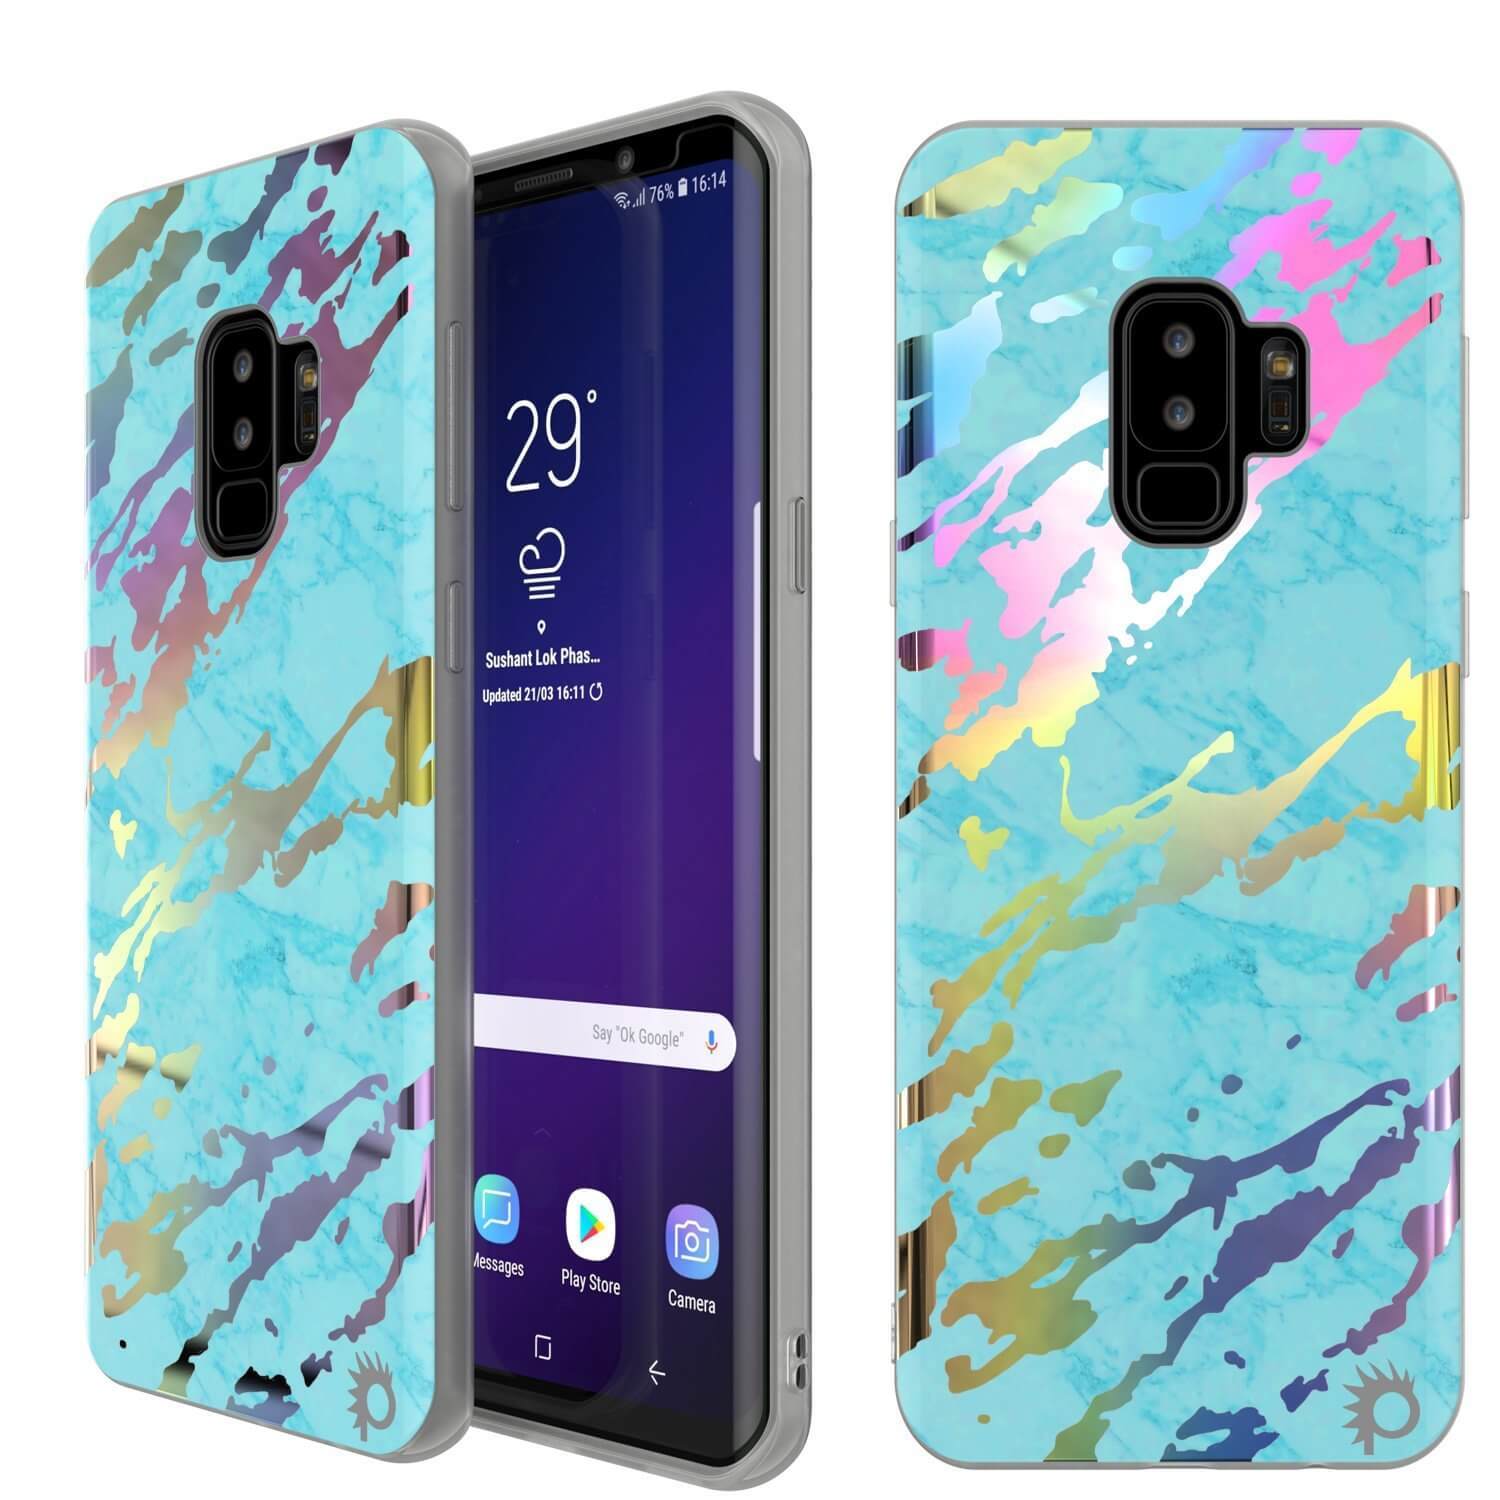 Punkcase Galaxy S9+ Marble Case, Protective Full Body Cover W/PunkShield Screen Protector (Teal Onyx)